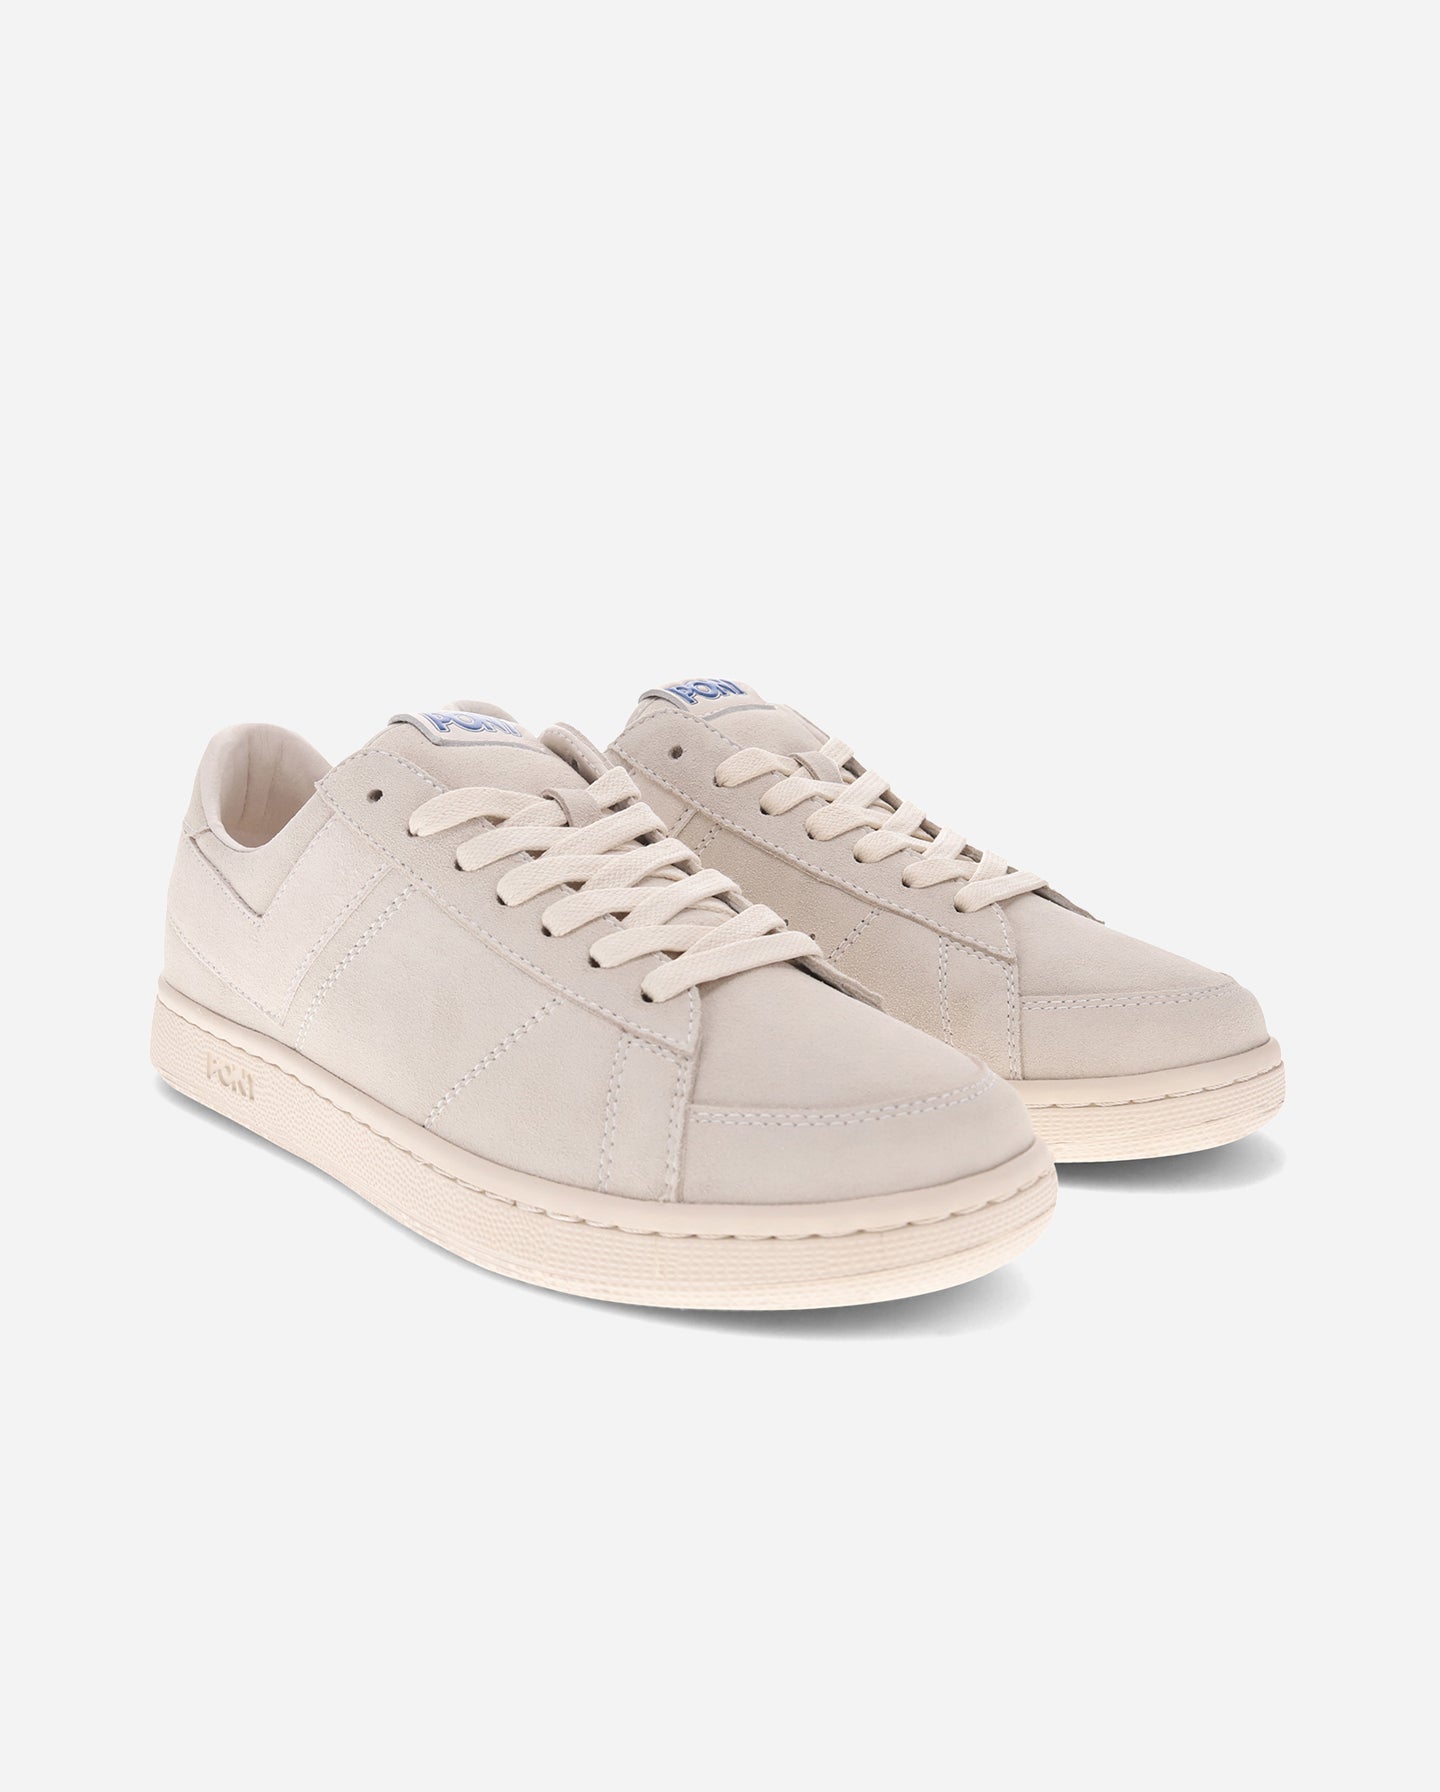 OATMEAL/OFF-WHITE M-PRO LOW LUX